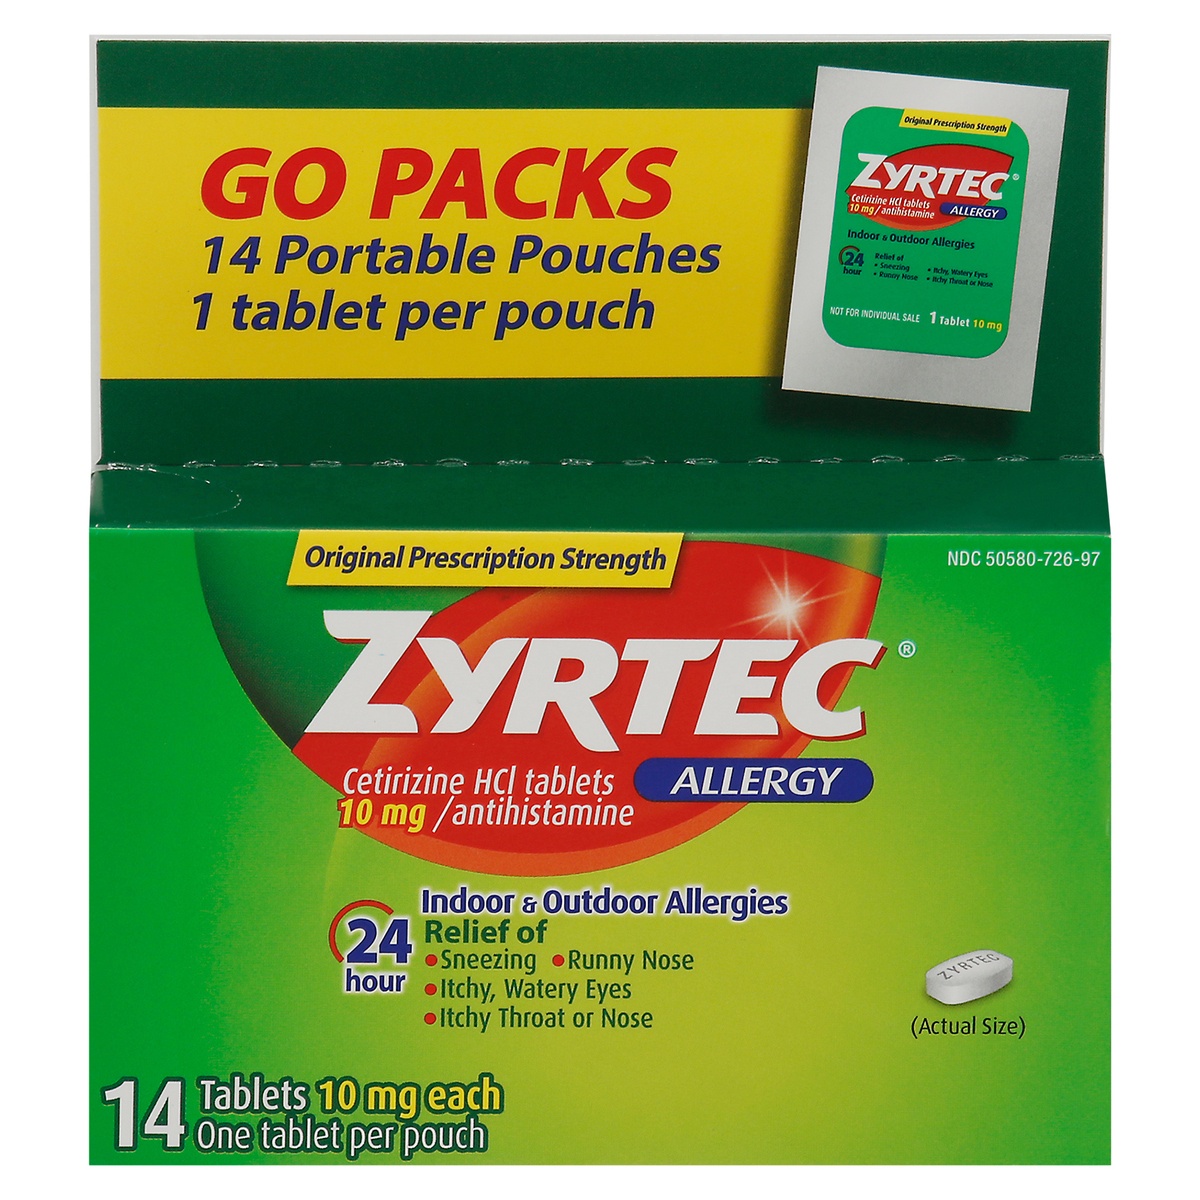 slide 1 of 9, Zyrtec 24 Hour Allergy Relief Tablets, Indoor & Outdoor Allergy Medicine with Cetirizine HCl per Antihistamine Tablet, On-the-Go Relief, Individual Travel Pouches, (14, 14 ct